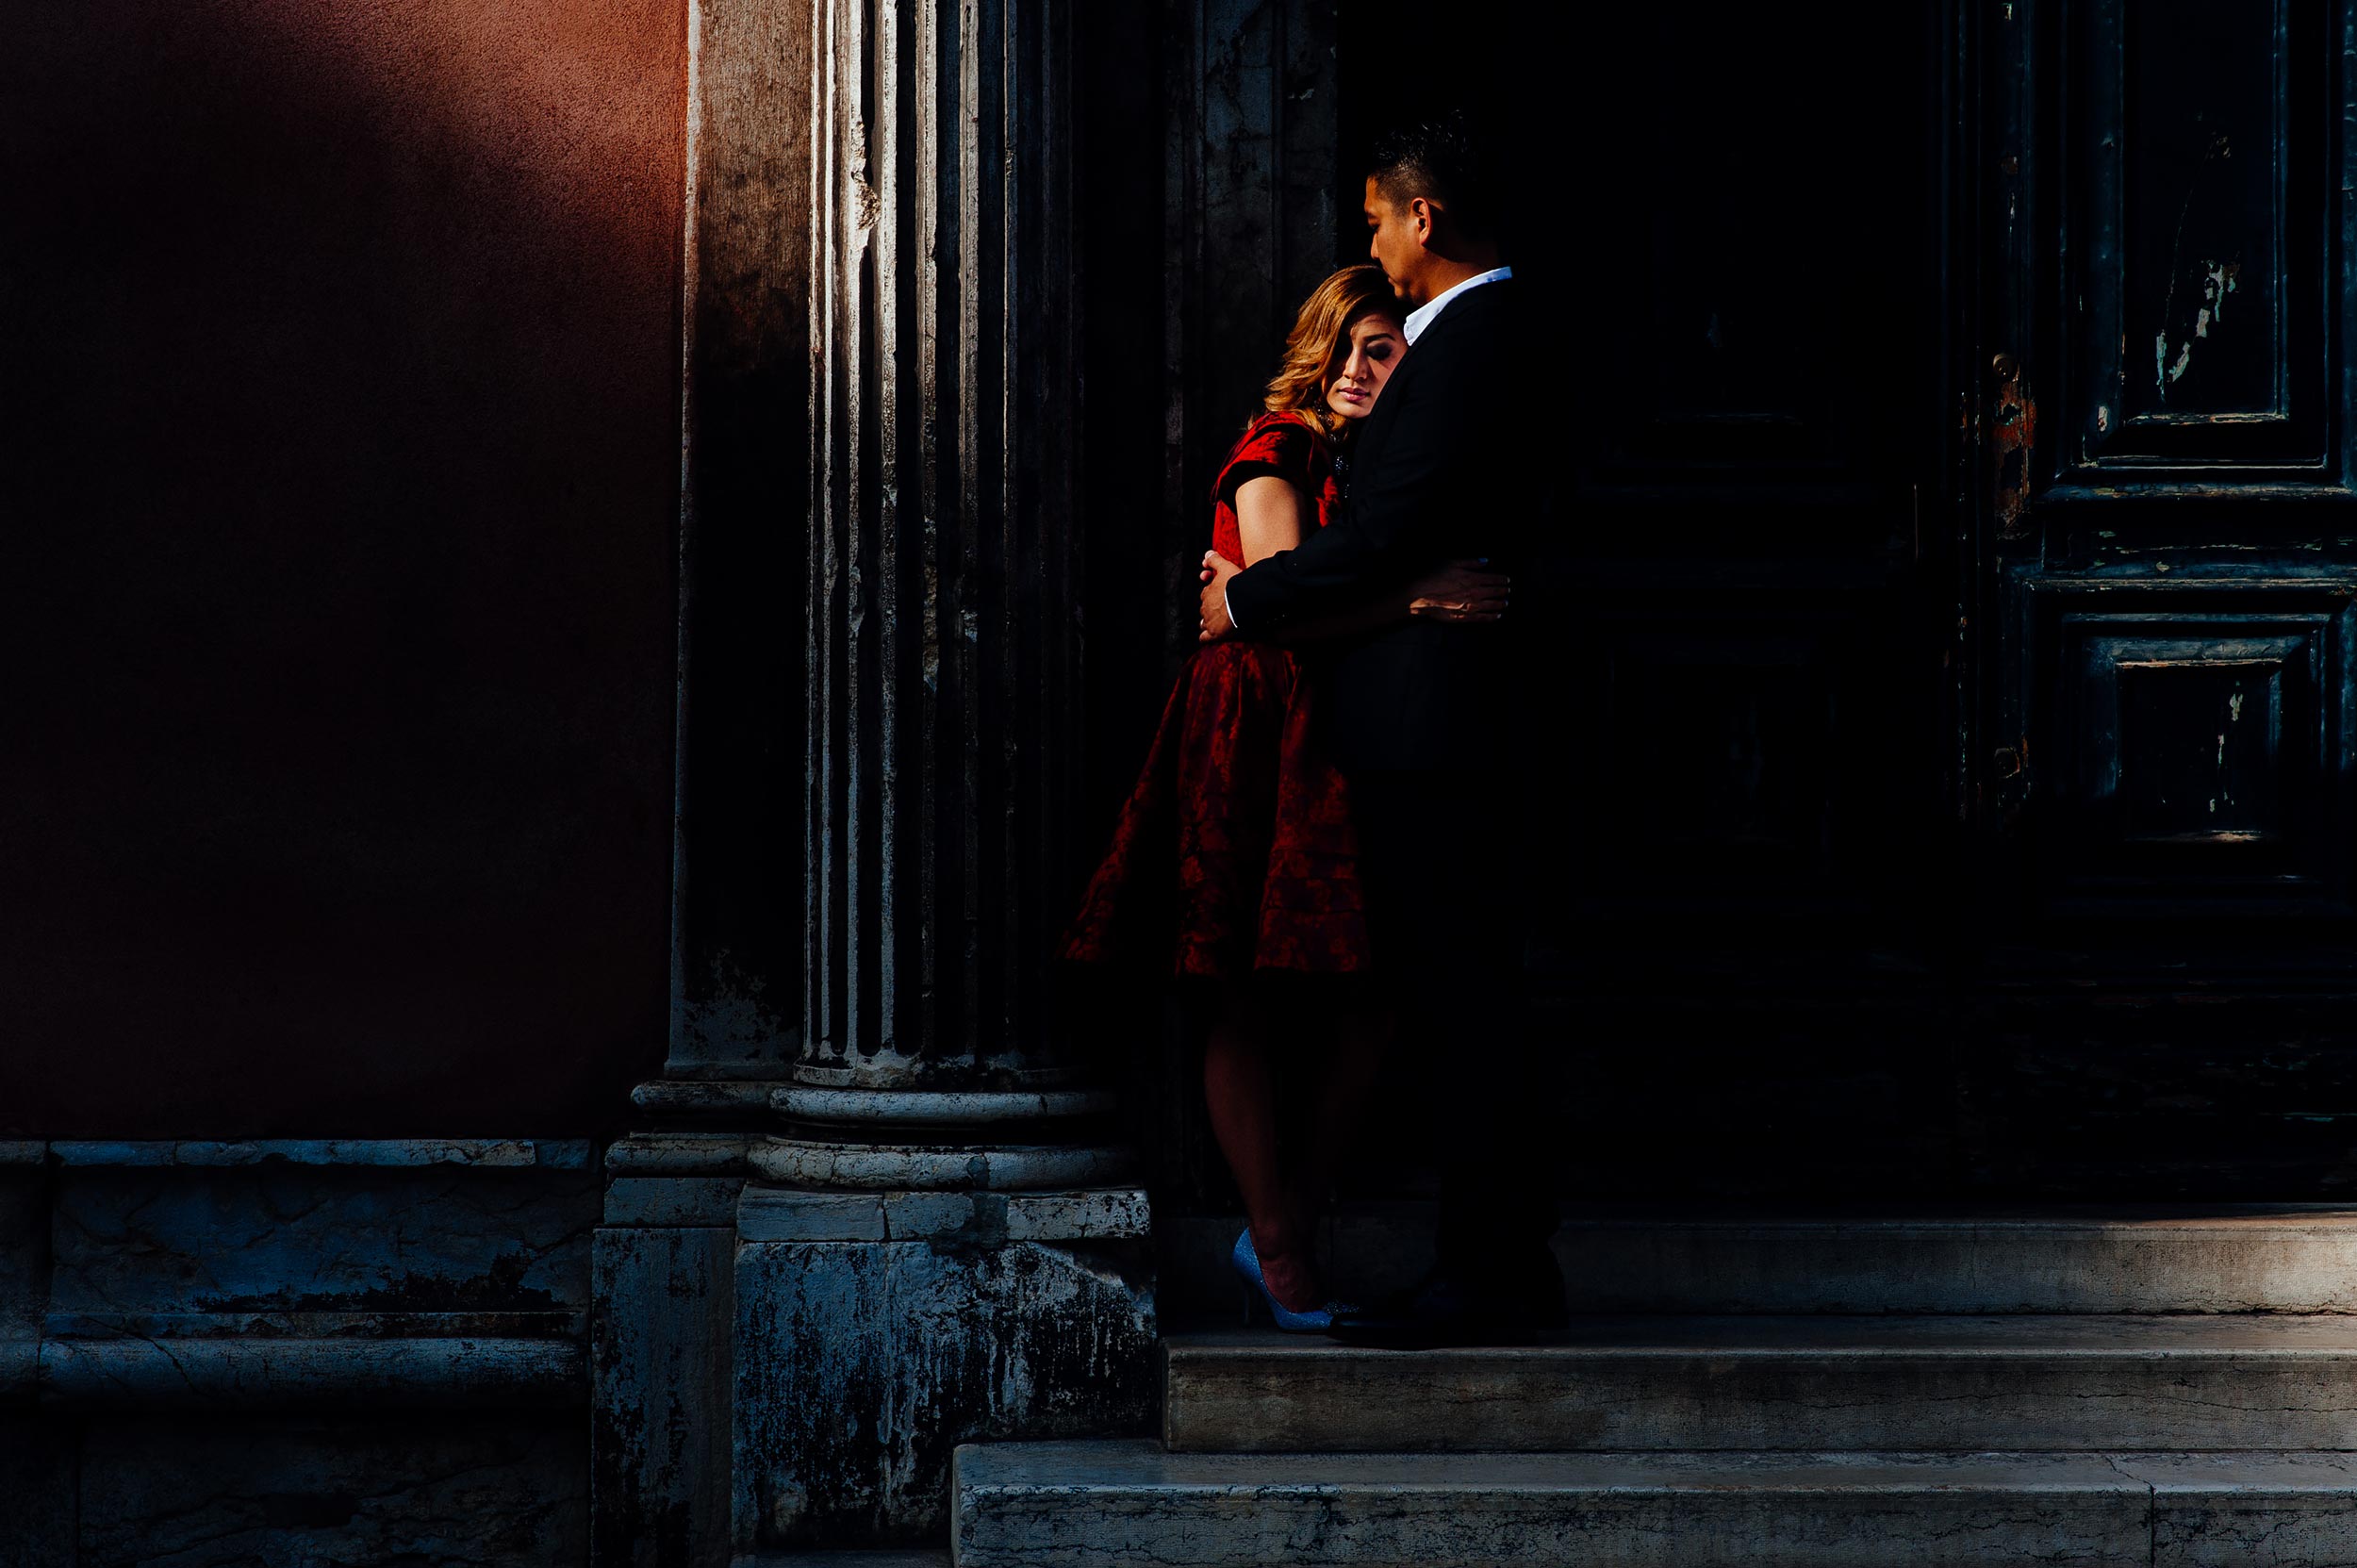 engagement-photographer-venice-couple-hugs-in-a-ray-of-light-red-dress.jpg